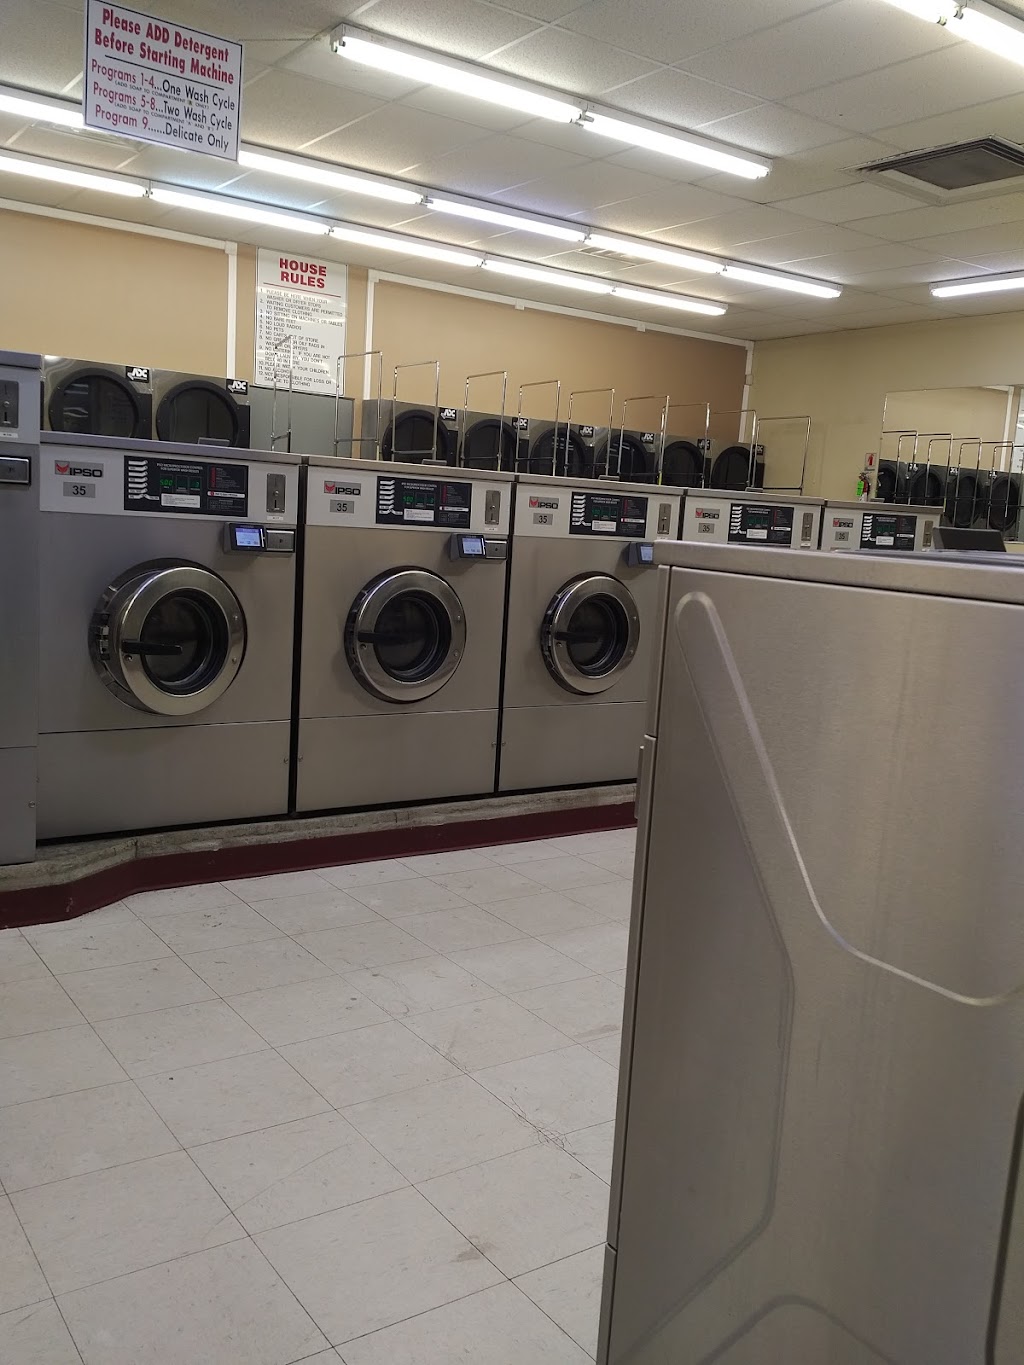 Anns Wash & Dry | 302 Titusville Rd, Poughkeepsie, NY 12603 | Phone: (845) 452-9472